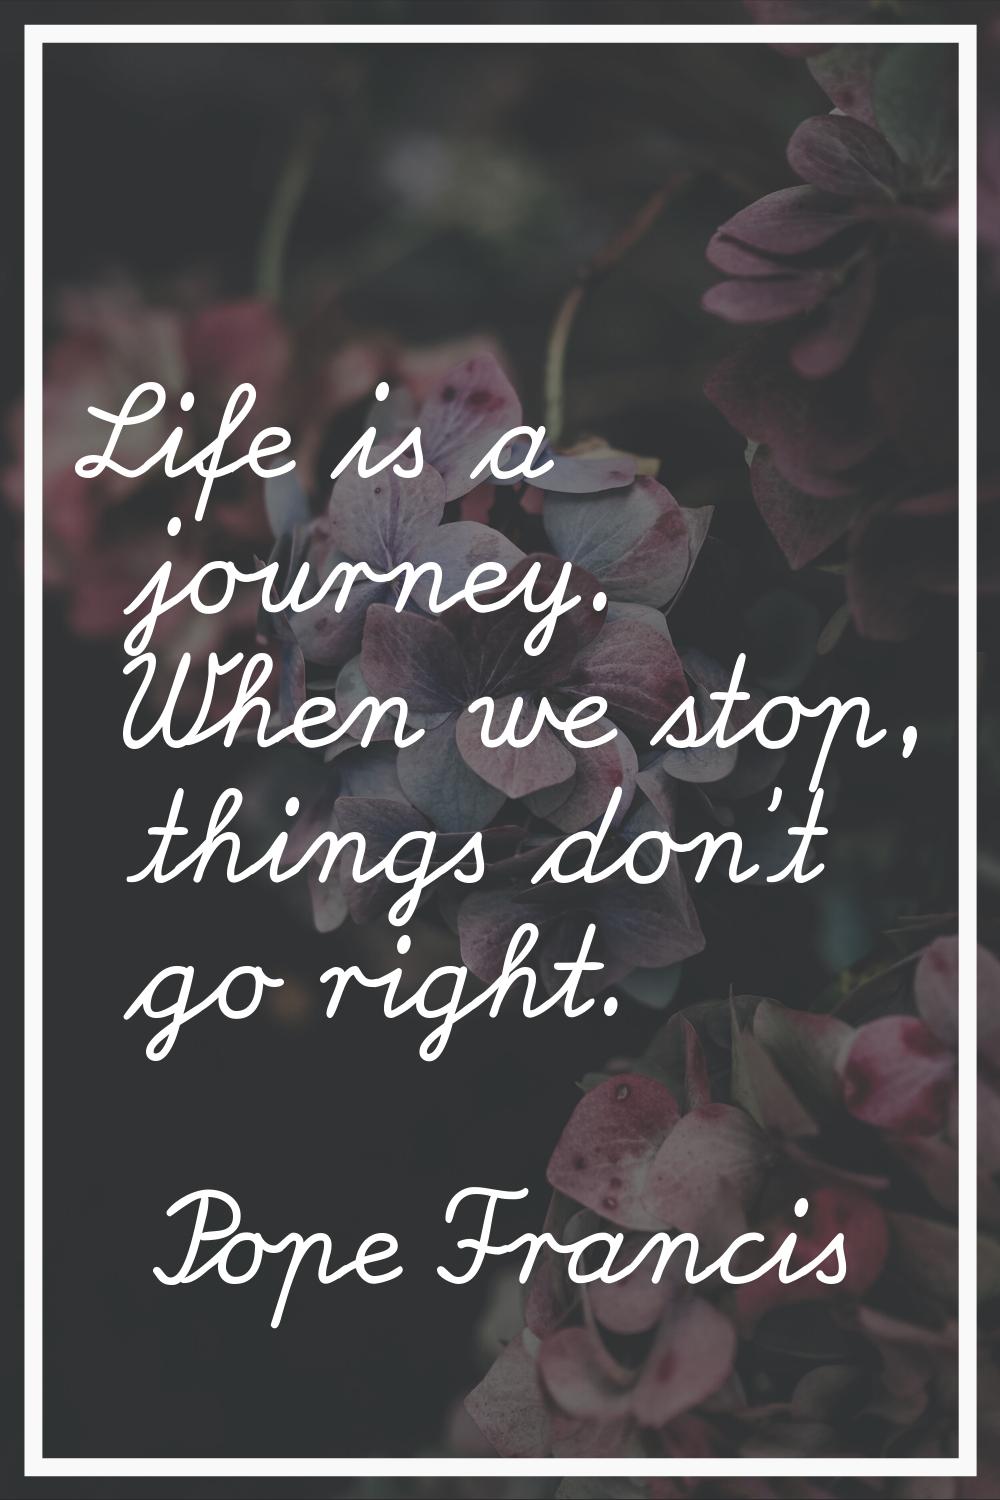 Life is a journey. When we stop, things don't go right.